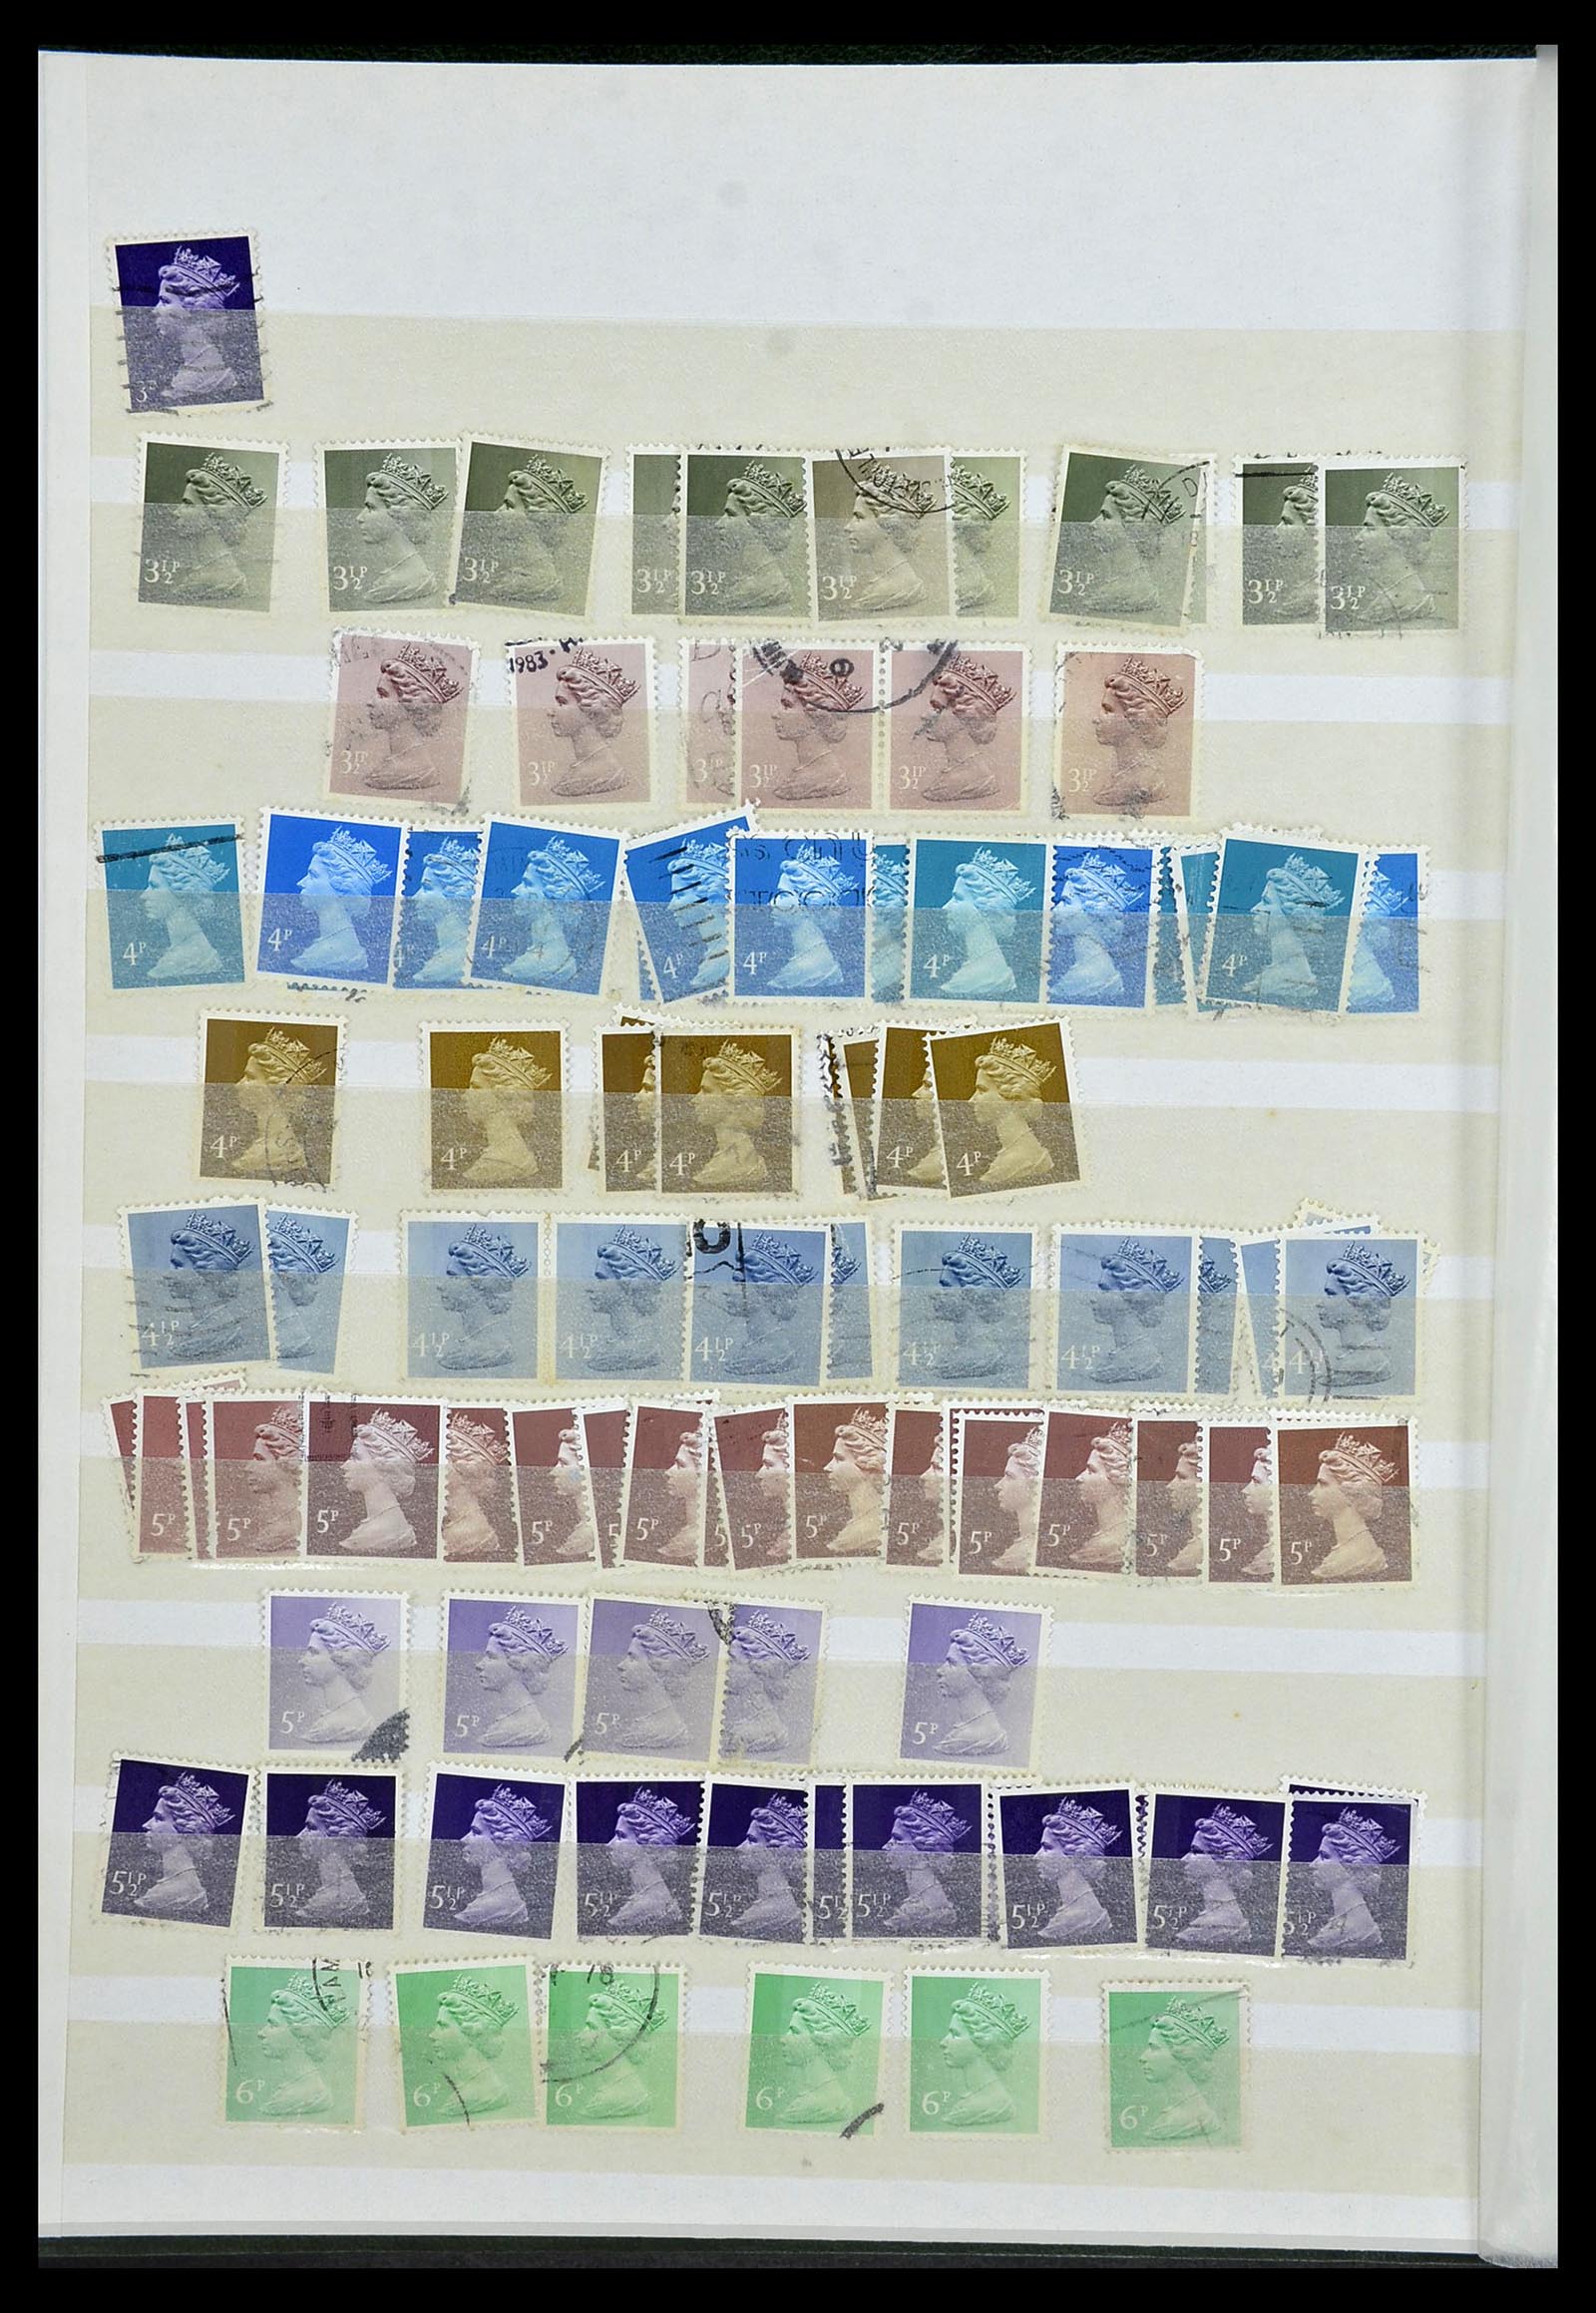 34368 089 - Stamp collection 34368 Great Britain sorting lot 1858-1990.